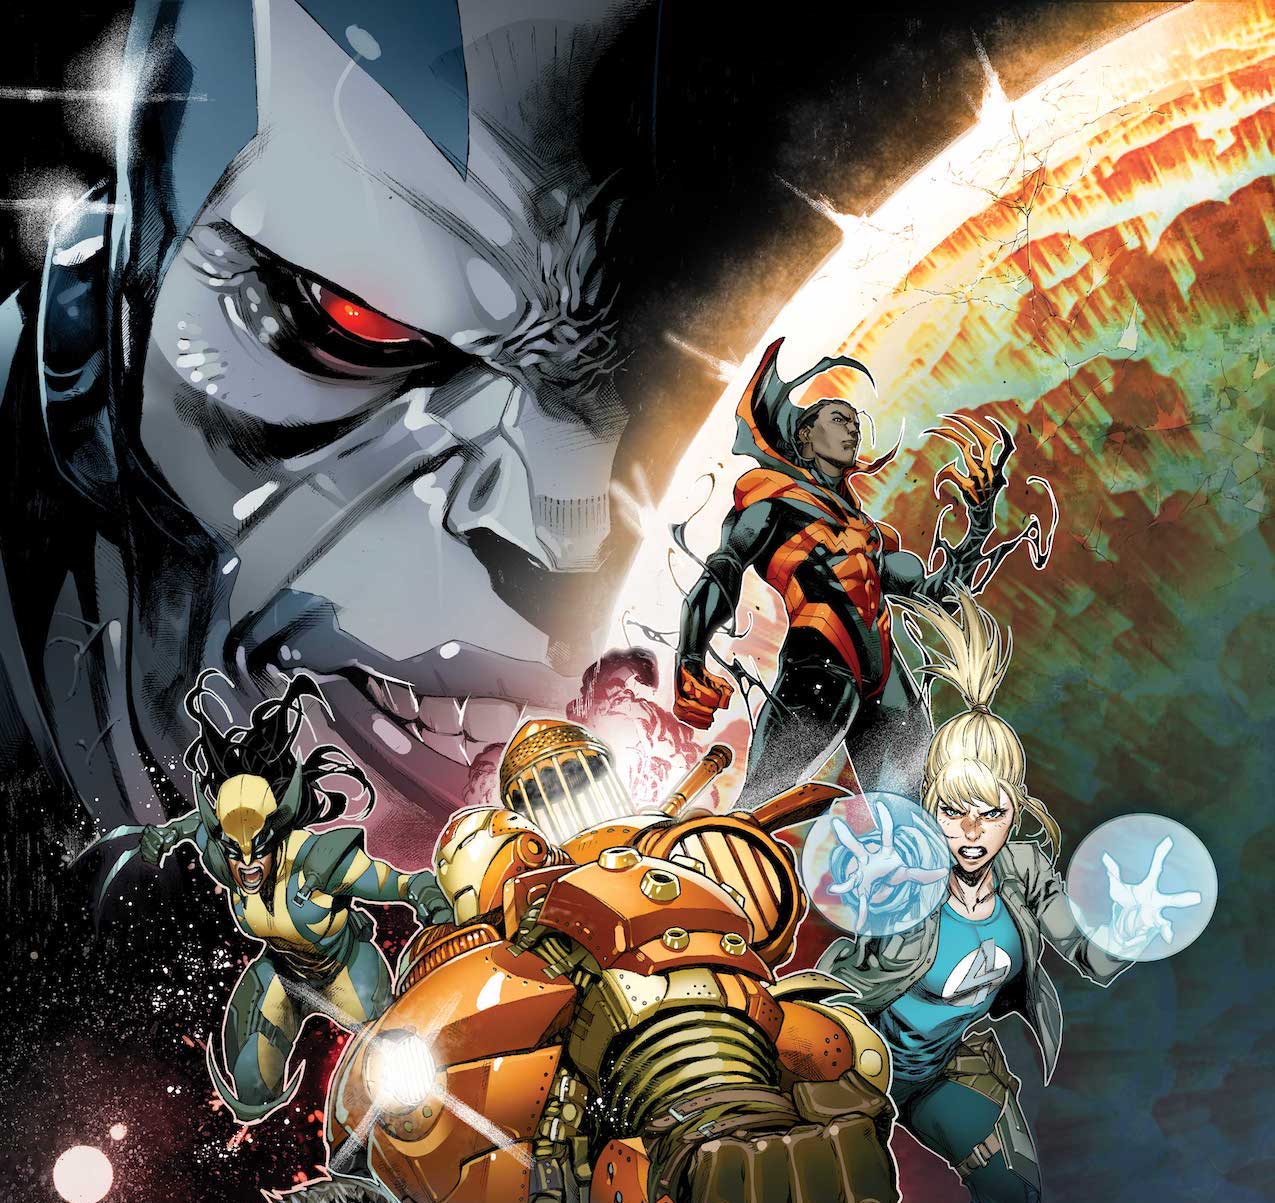 Marvel teases the rise of Apocalypse in 'Dark Ages' #2